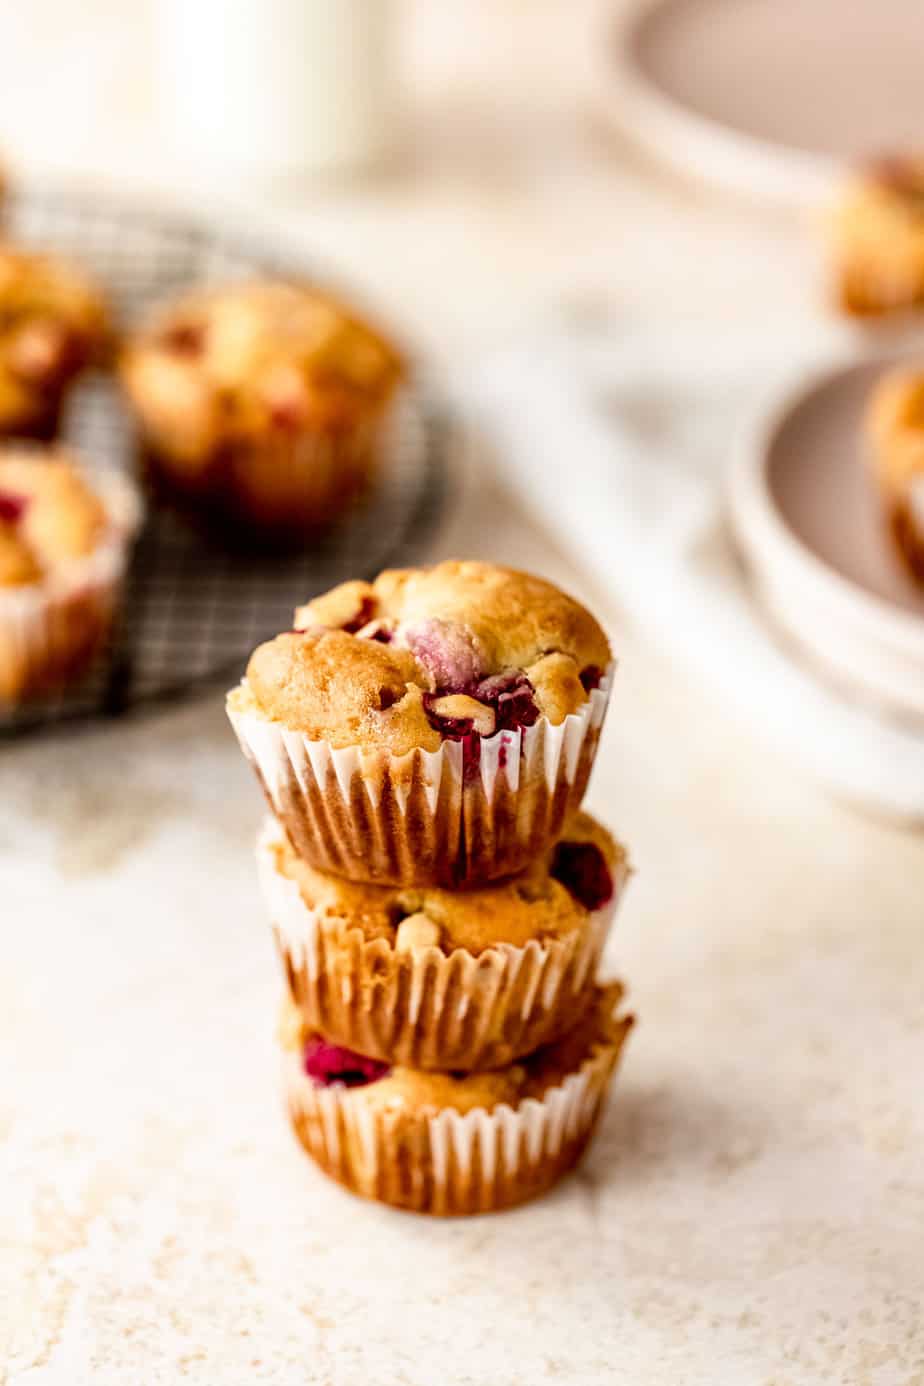 Three muffins stacked on top of each other with a few more in the background.